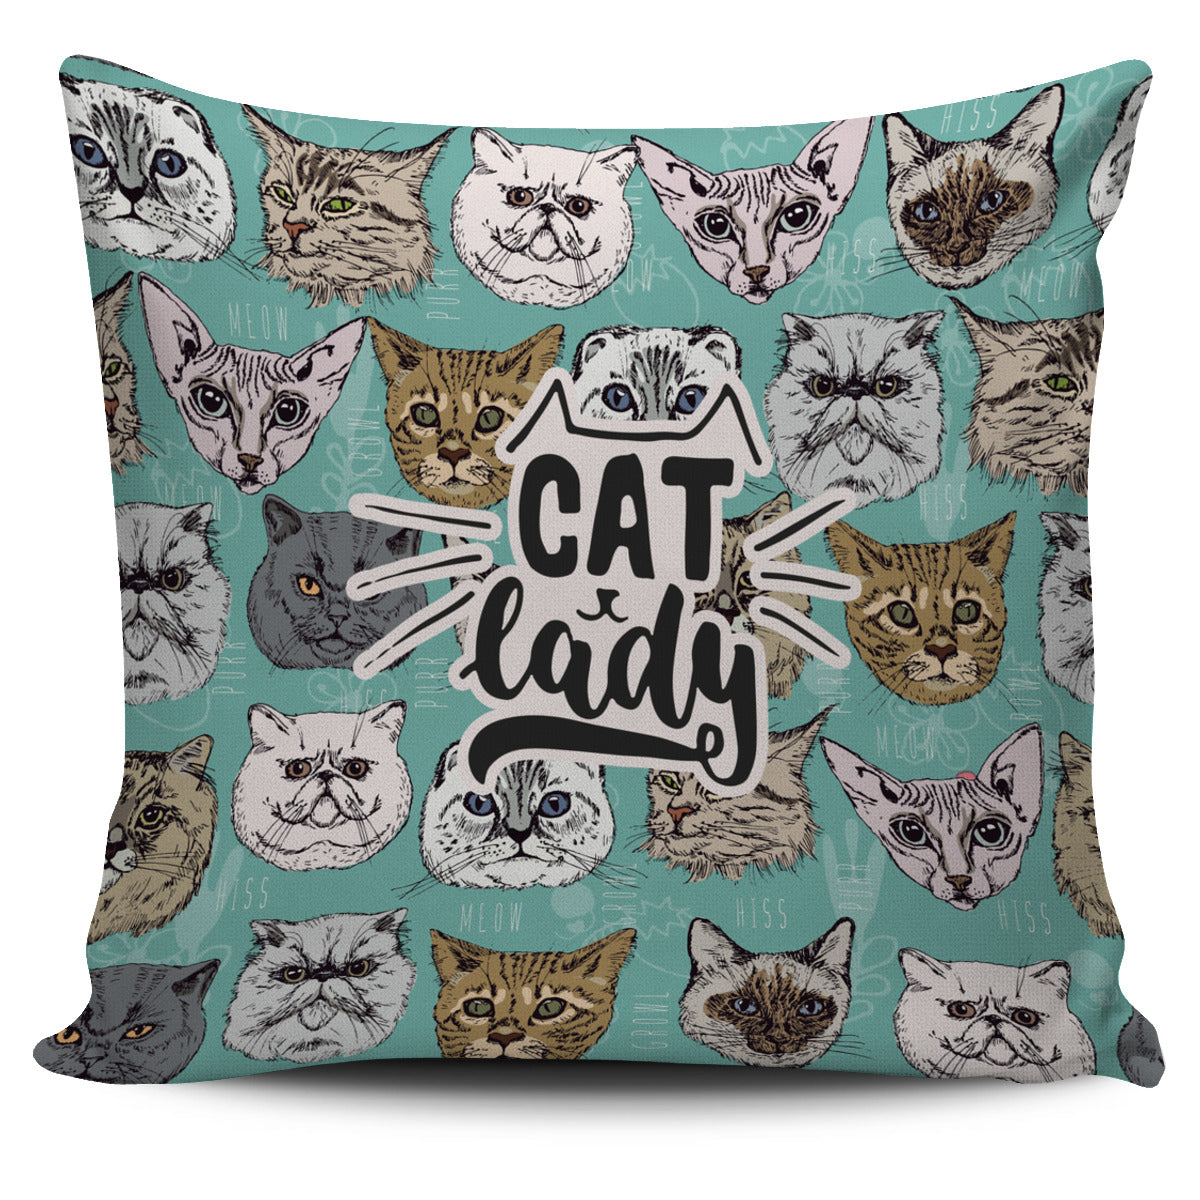 Cat Lady Pillow Cover